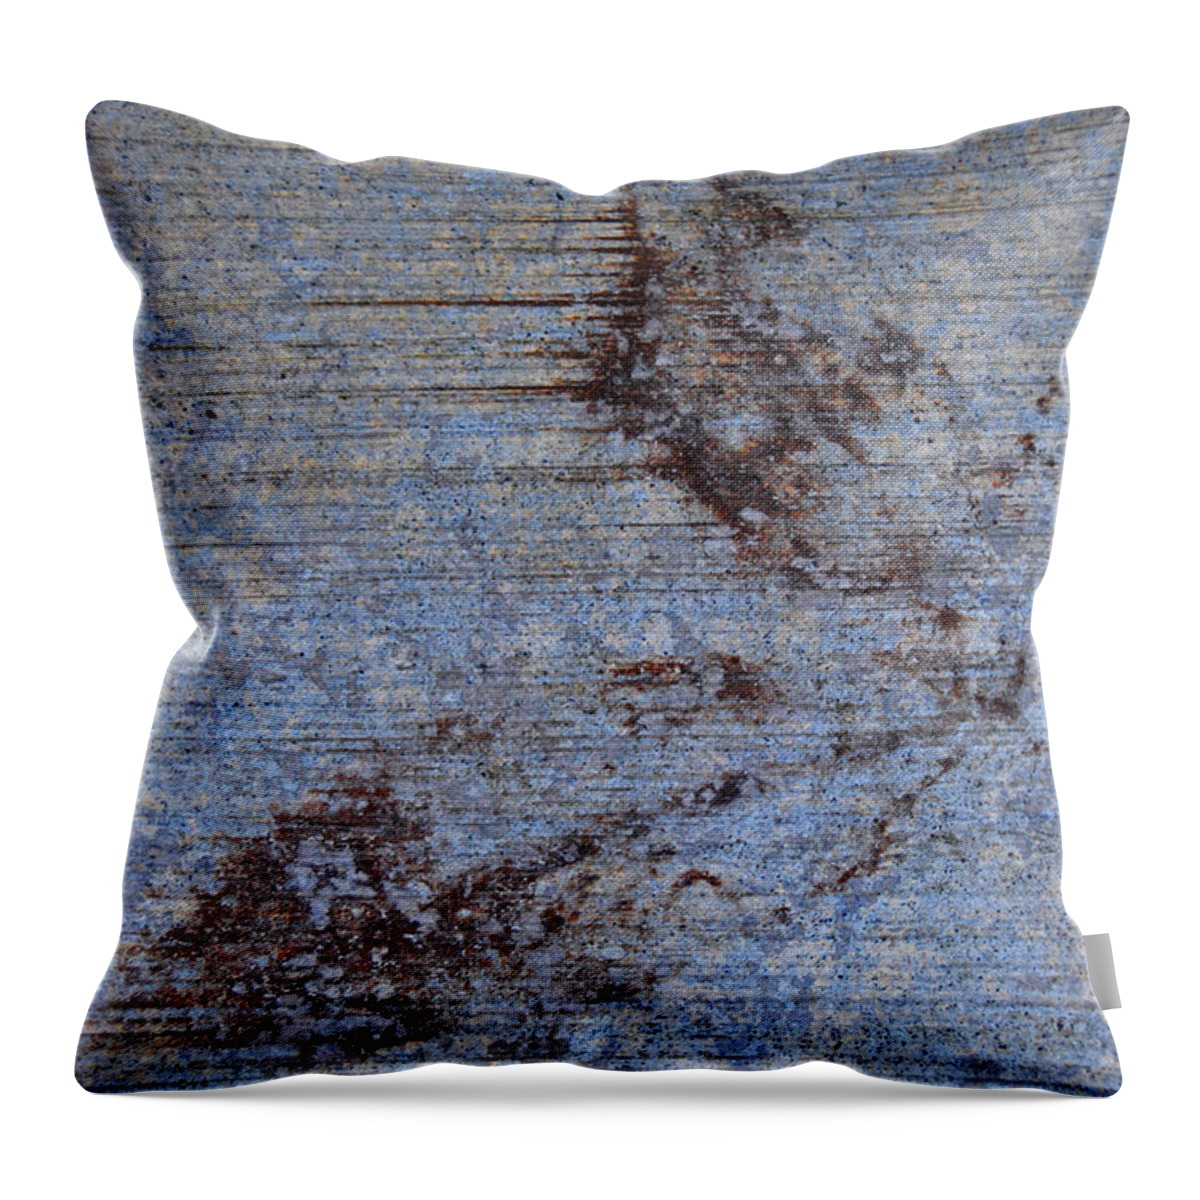 Raw Abstract Throw Pillow featuring the photograph Metamorphosis by Jani Freimann